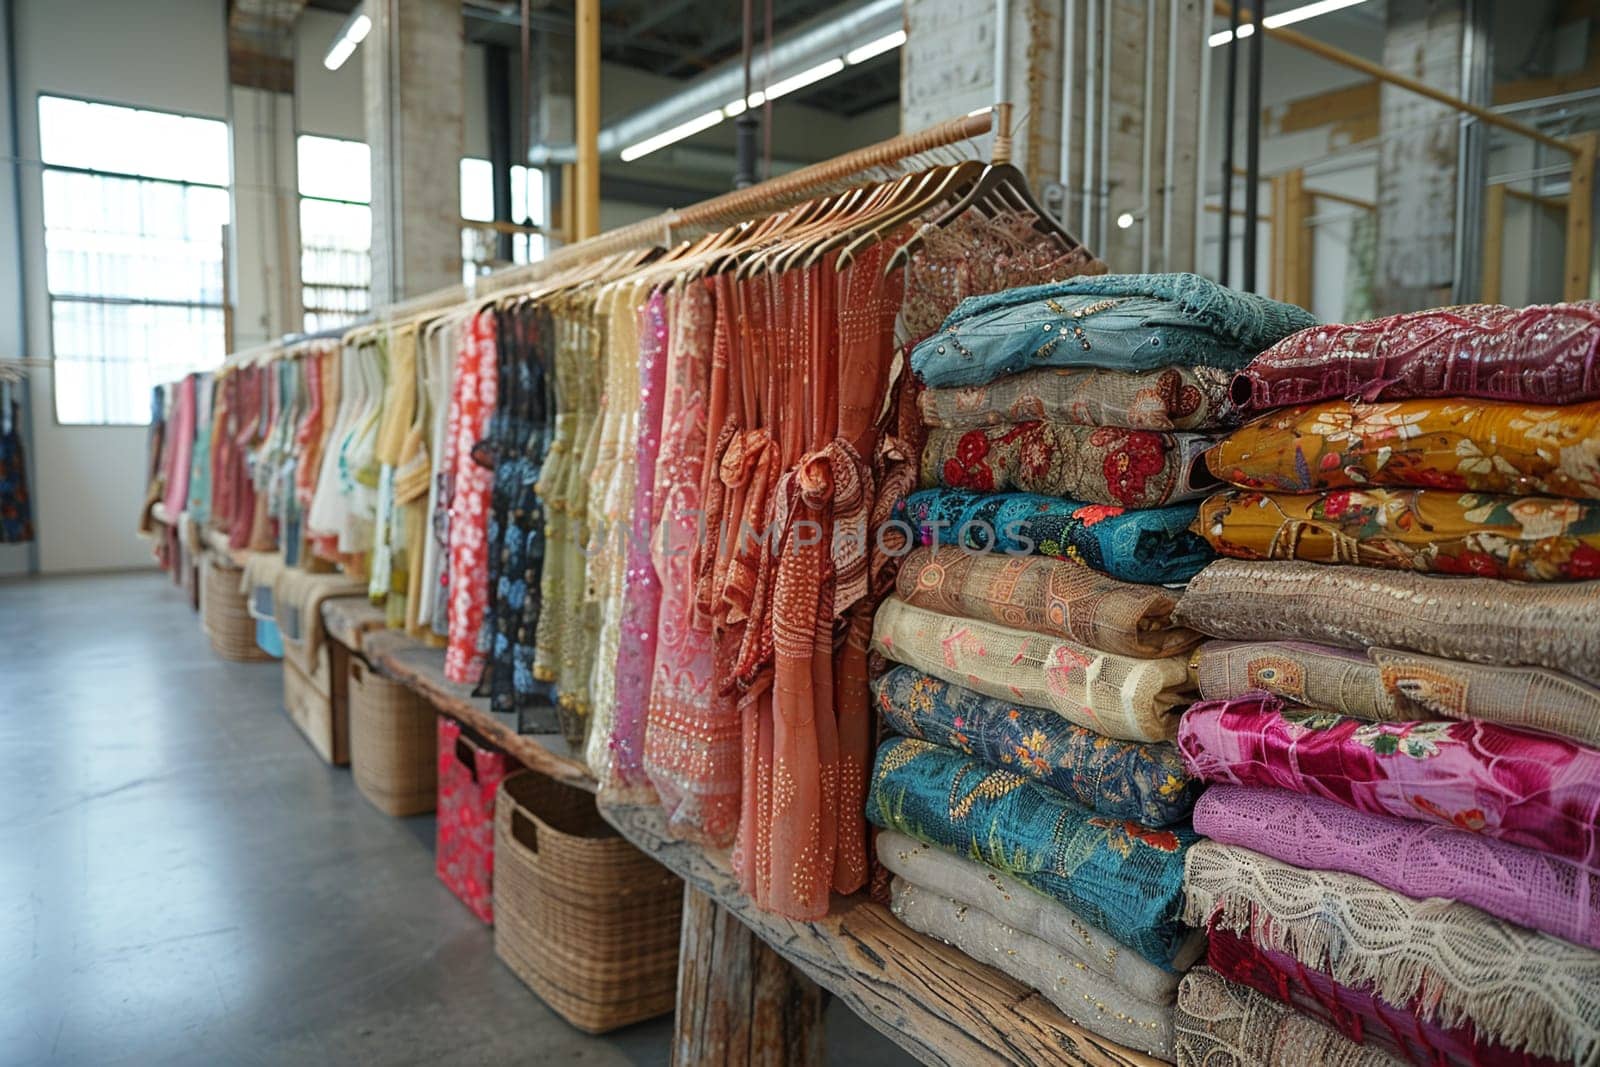 Eco-Friendly Fashion Boutique Models Sustainability in Business of Apparel, Hangers and eco-fabrics drape a narrative of responsibility and style in the fashion business.